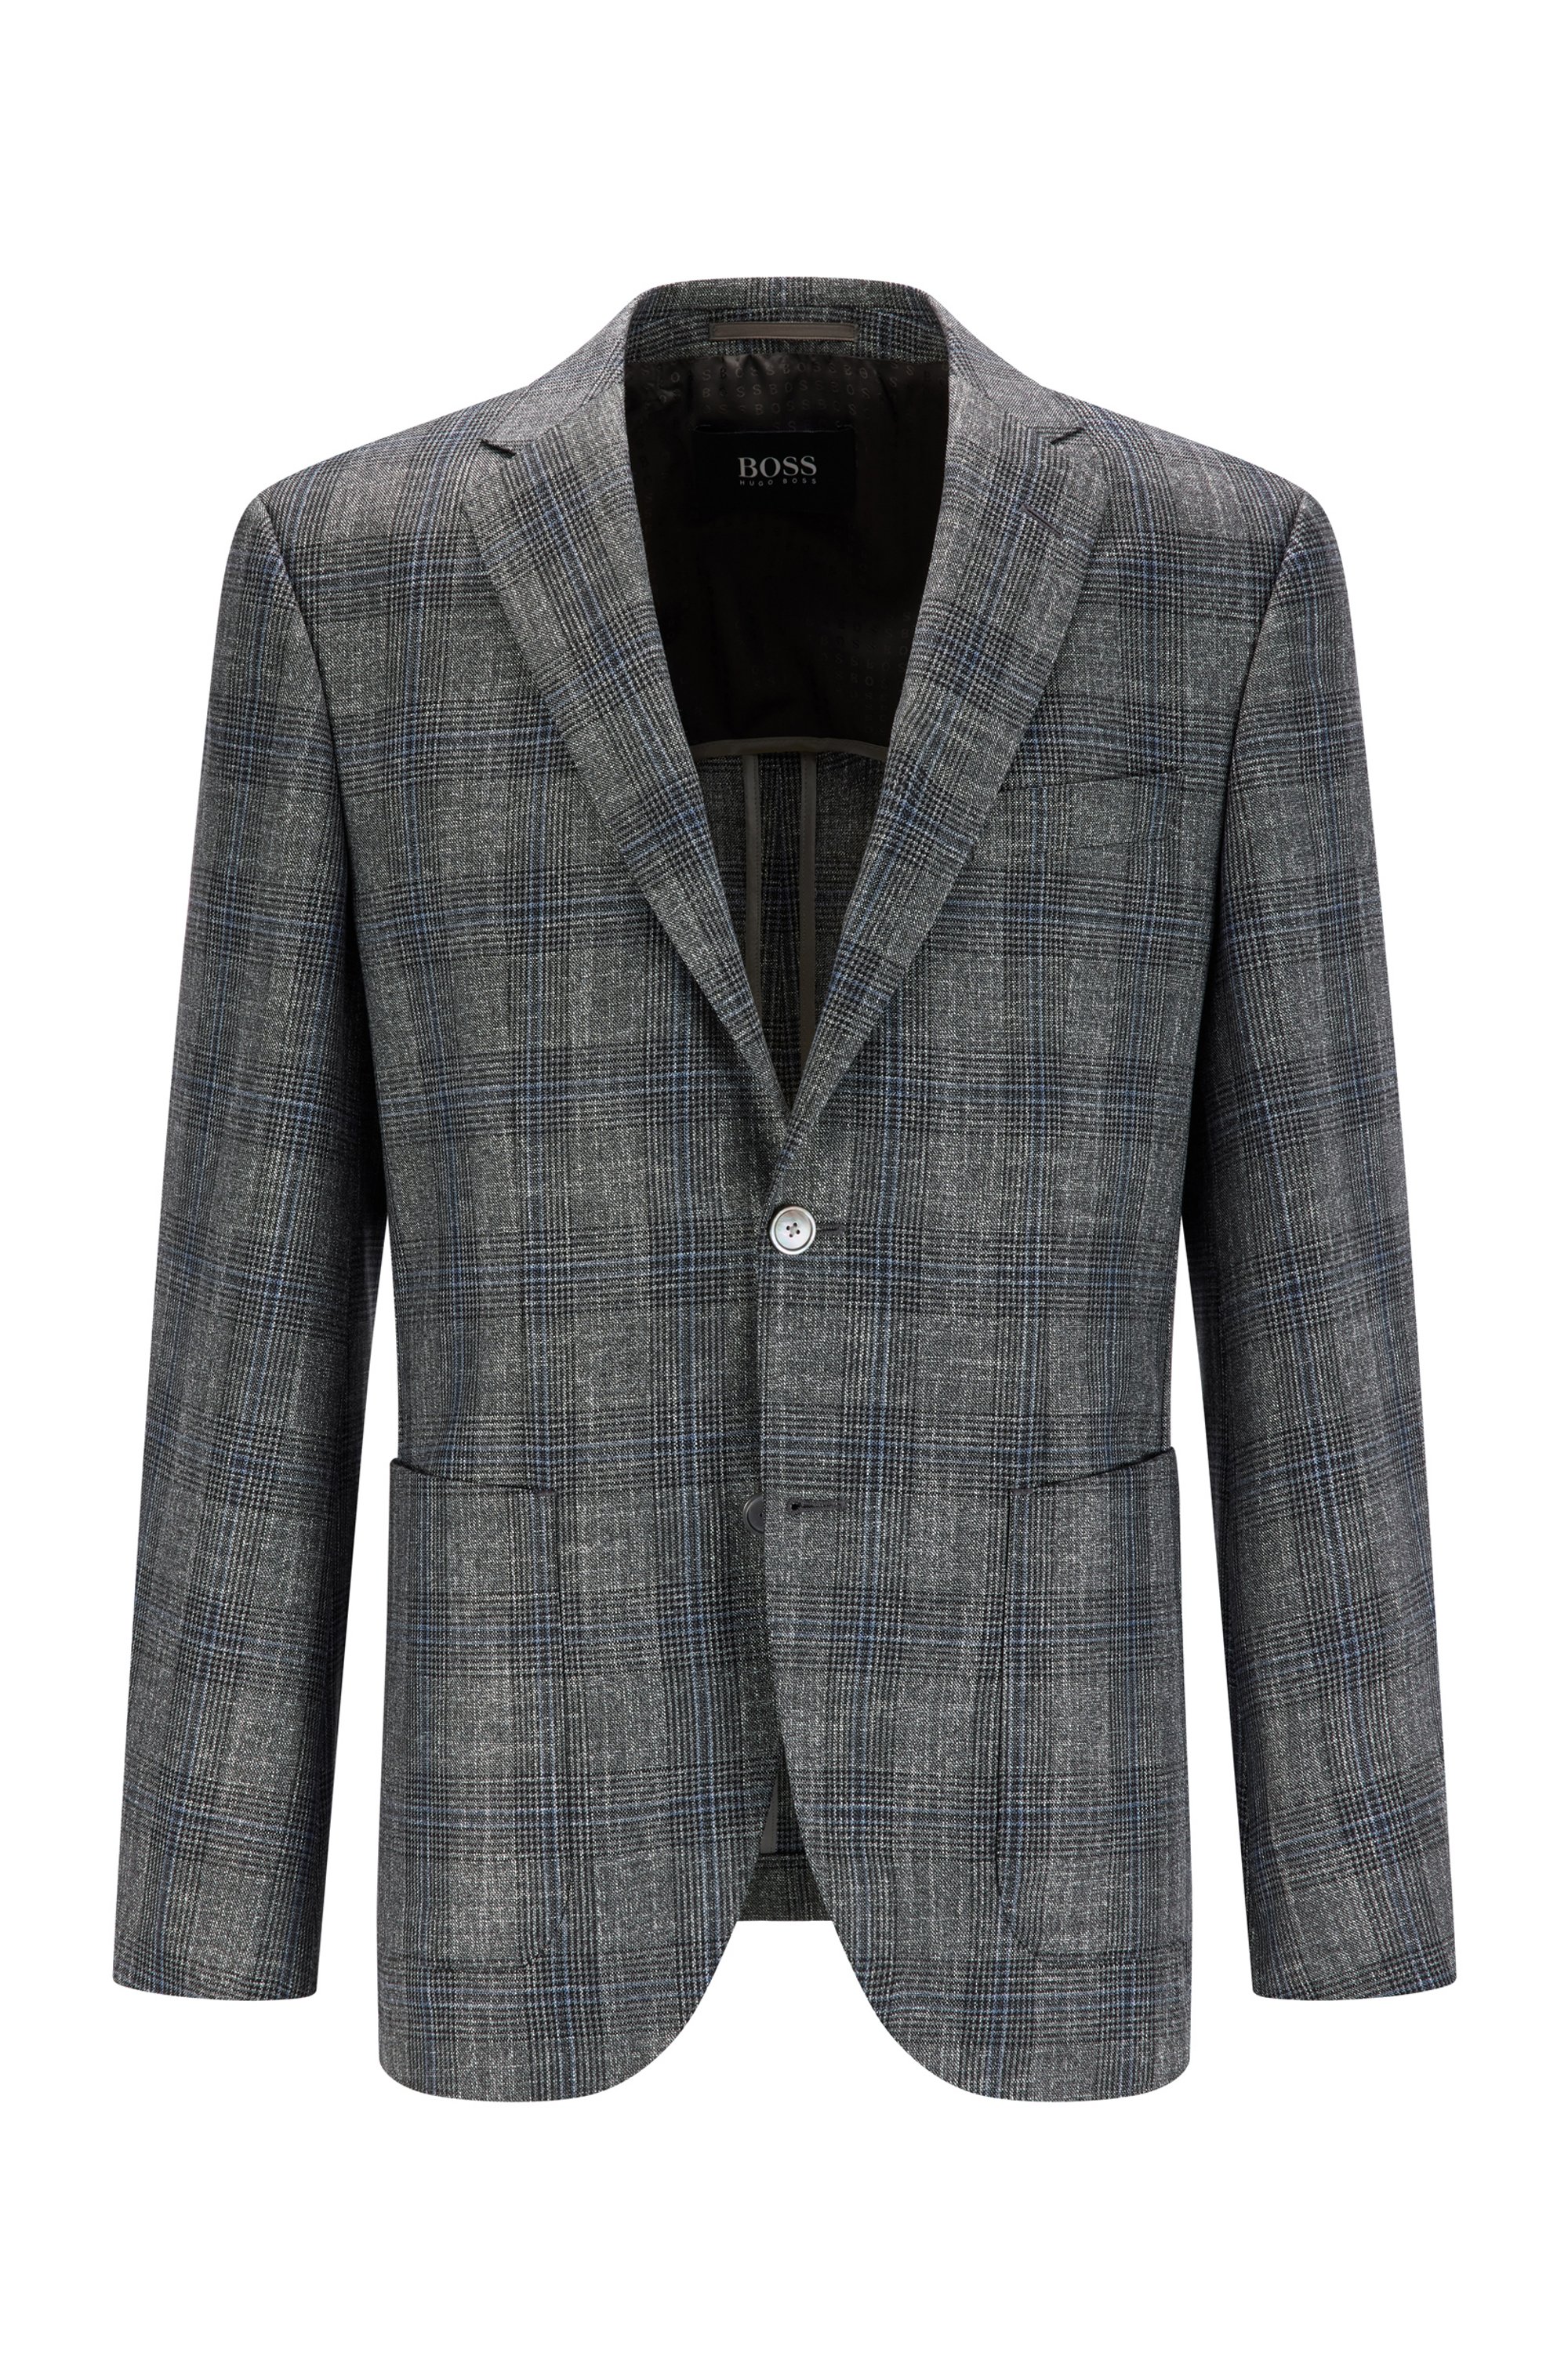 Regular-fit jacket in a checked wool blend, Grey